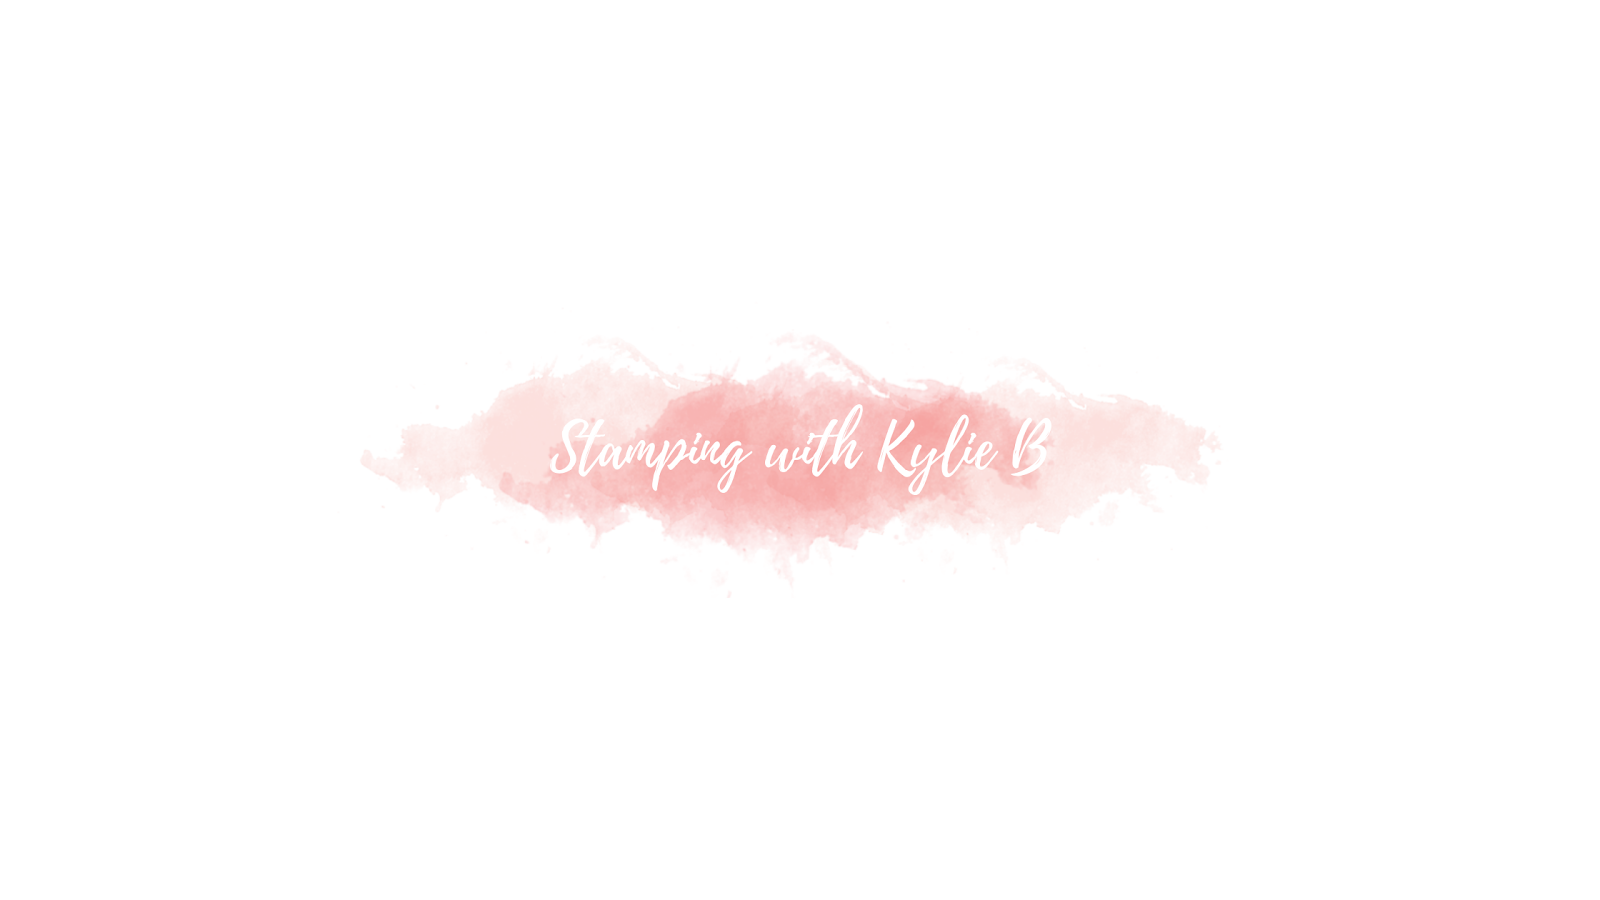 Stampin Up with Kylie B